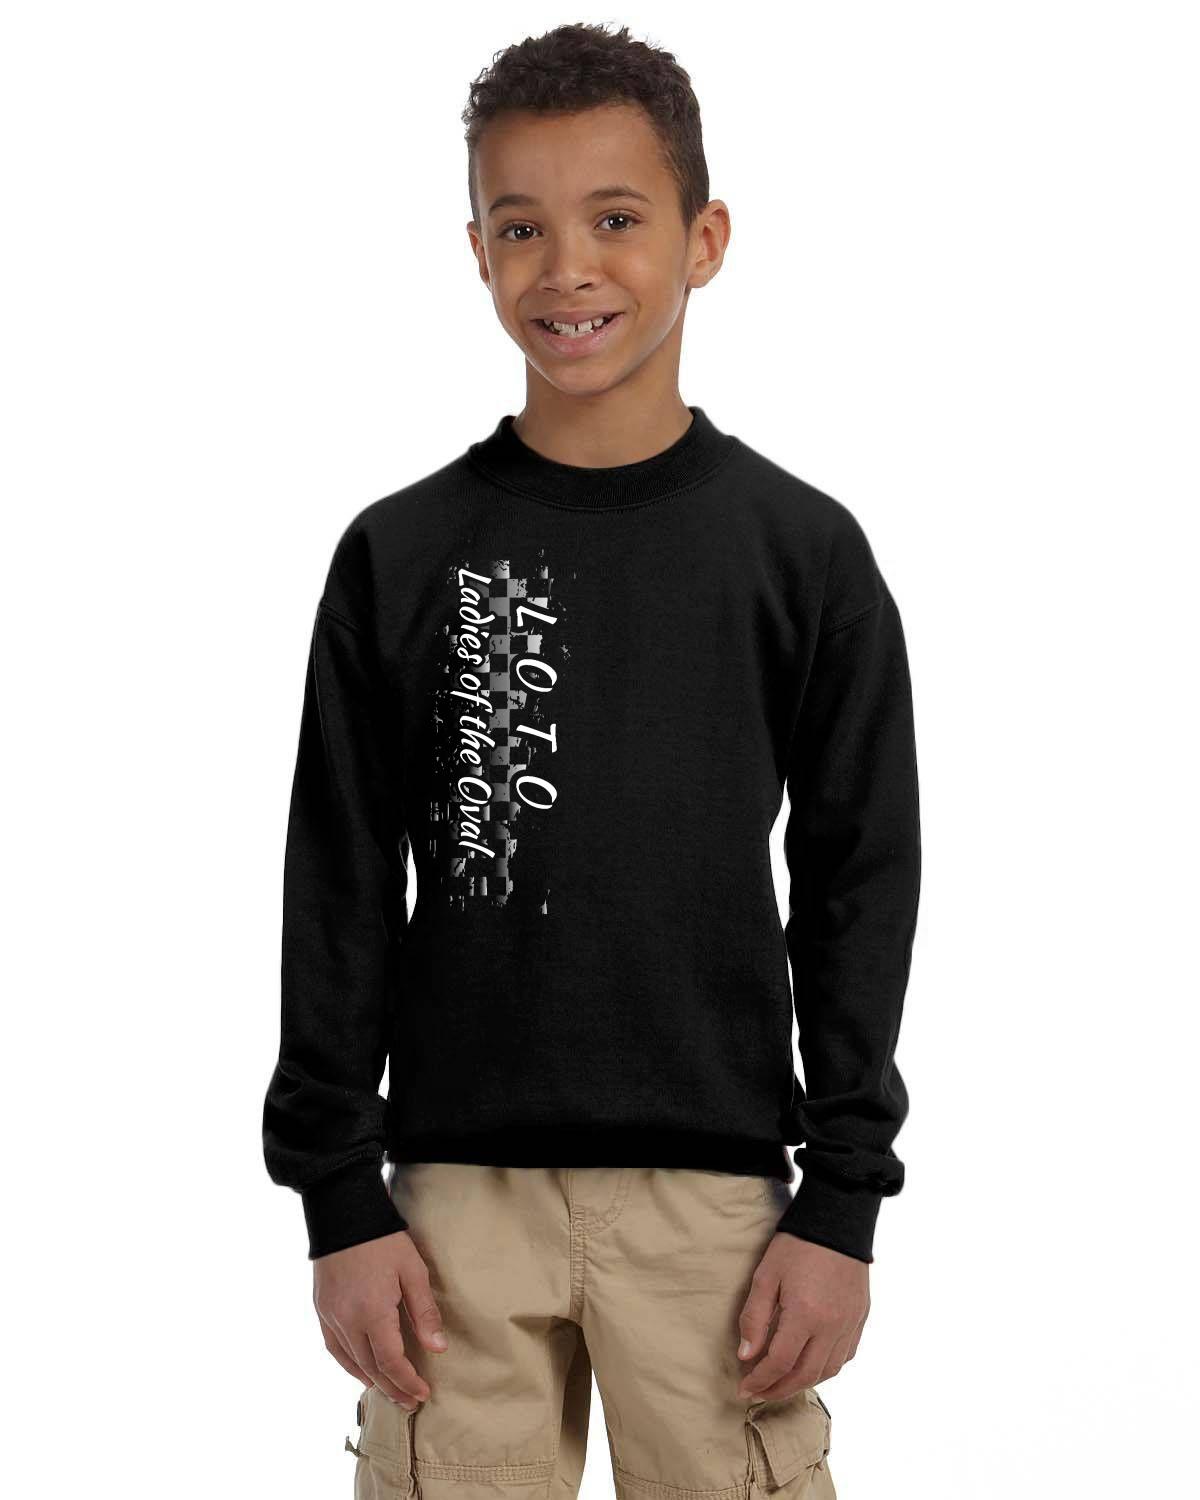 LOTO Ladies of the Oval Youth Crew neck sweater